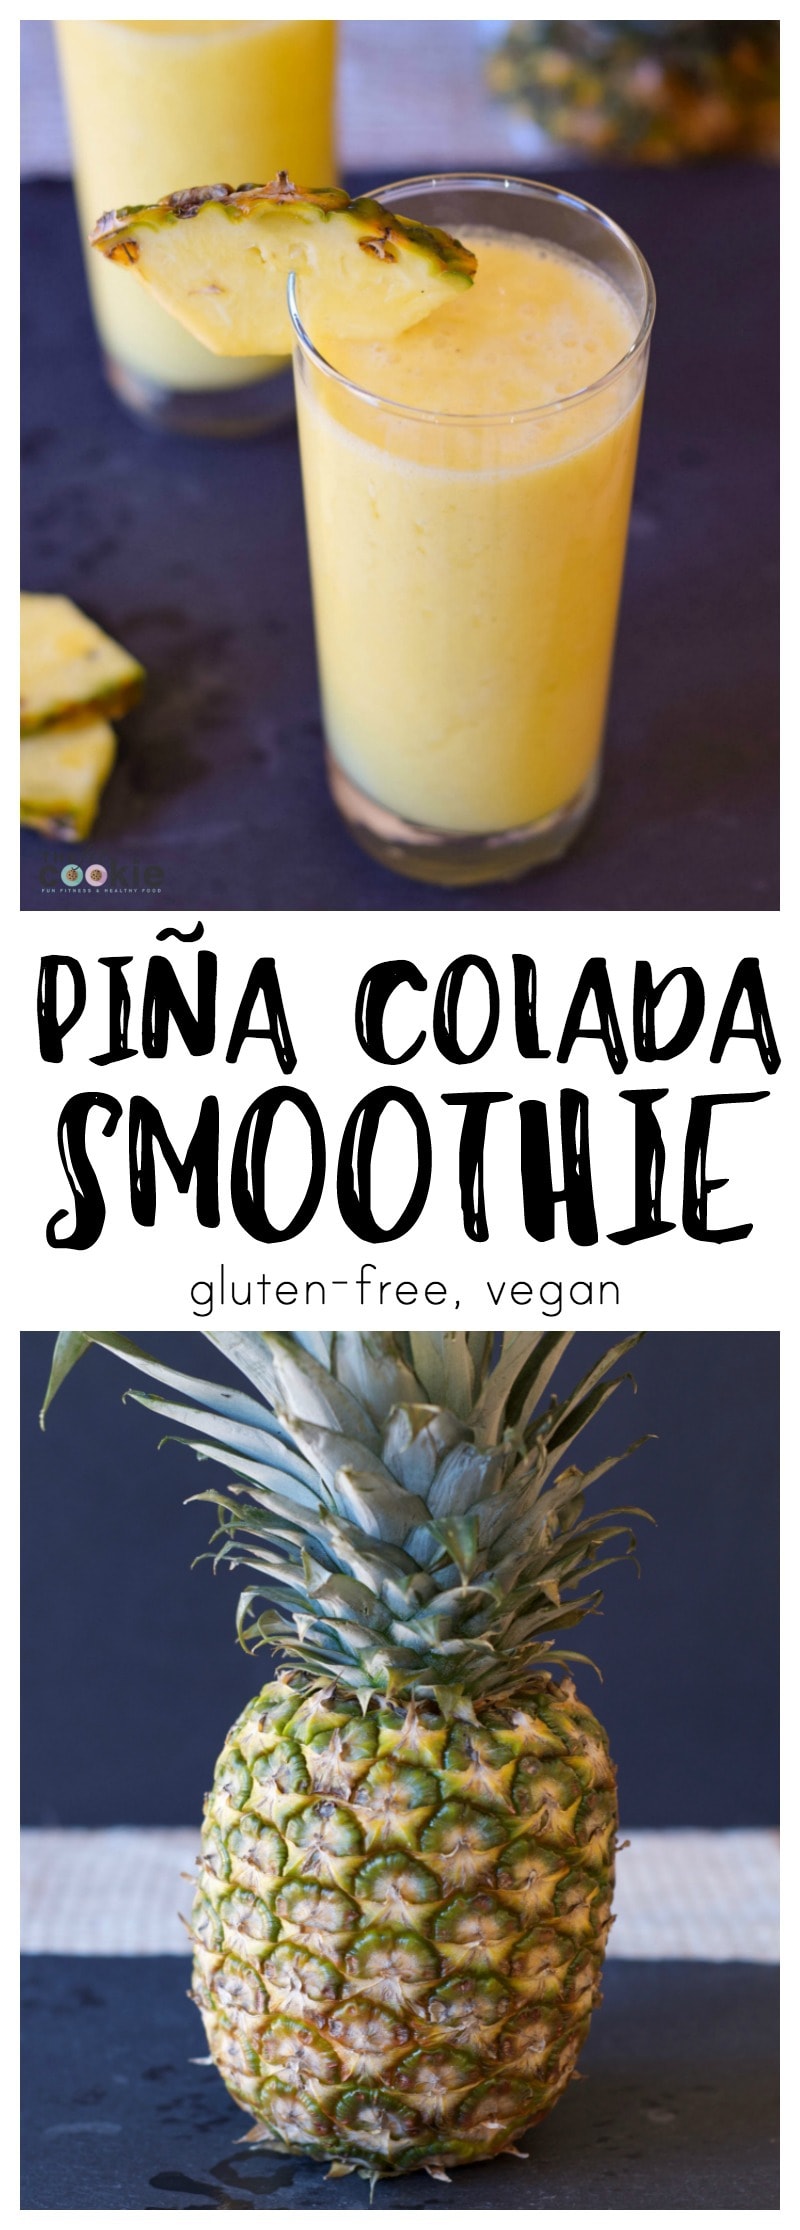 image collage of pineapple smoothie in a glass and a pineapple with text overlay.